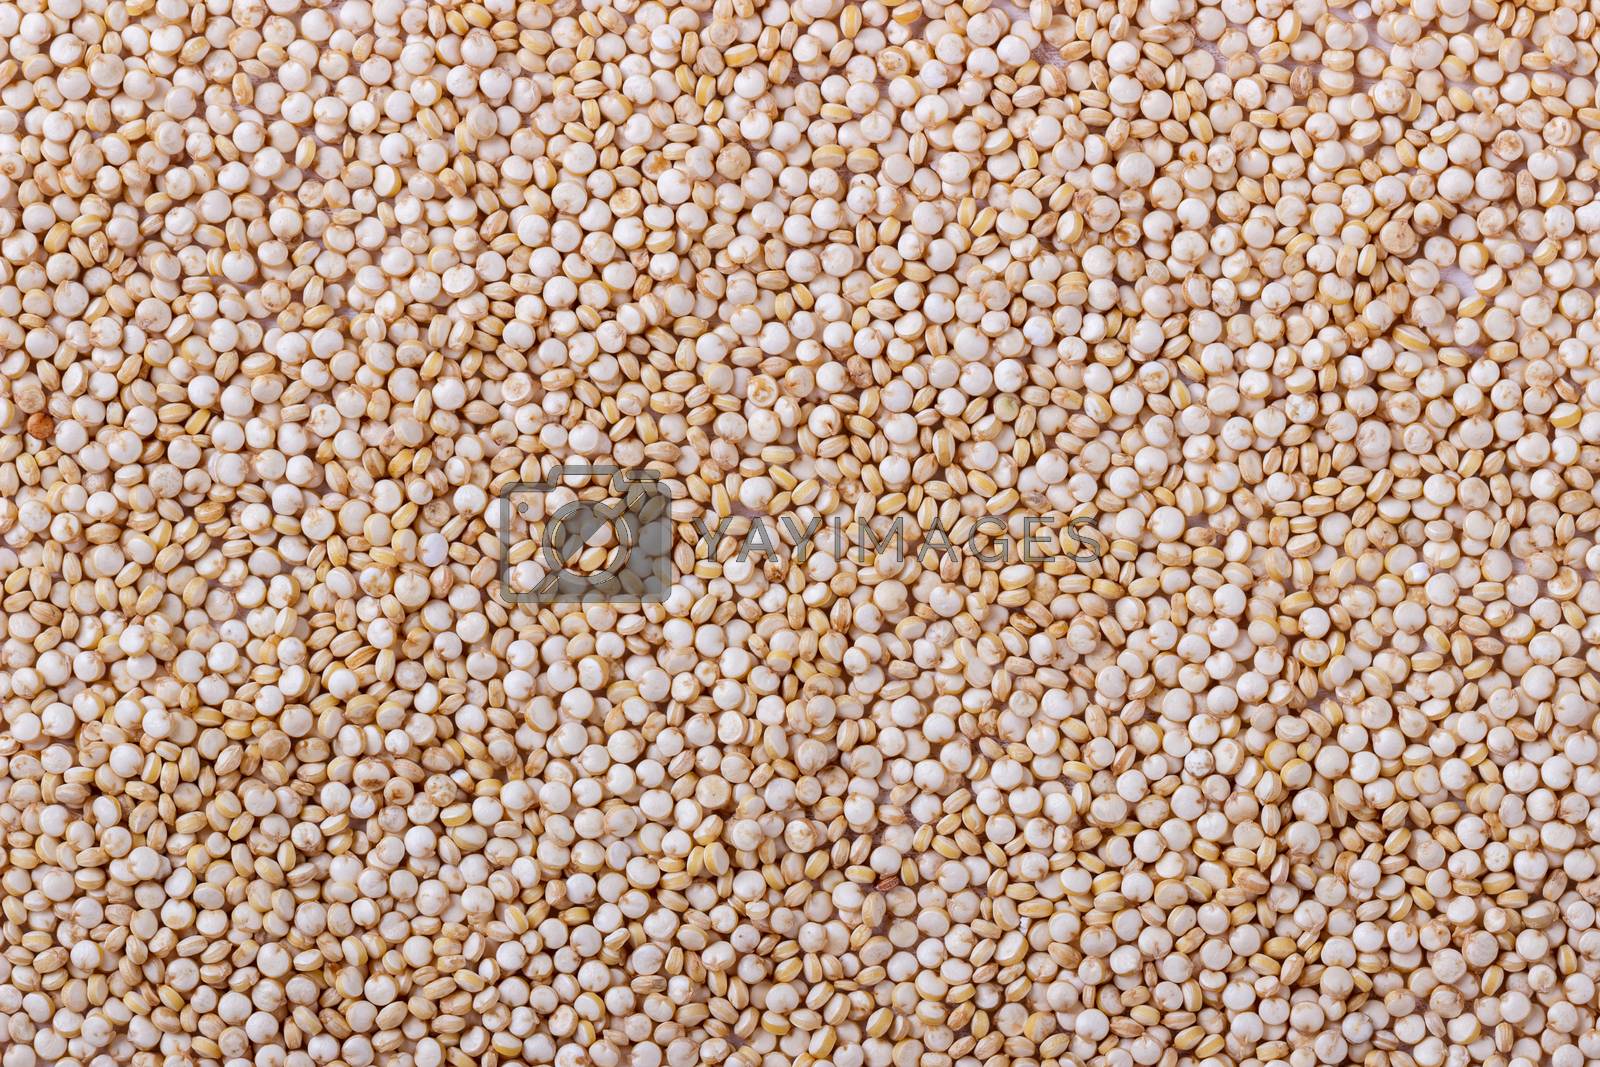 Royalty free image of White quinoa seeds by Lana_M